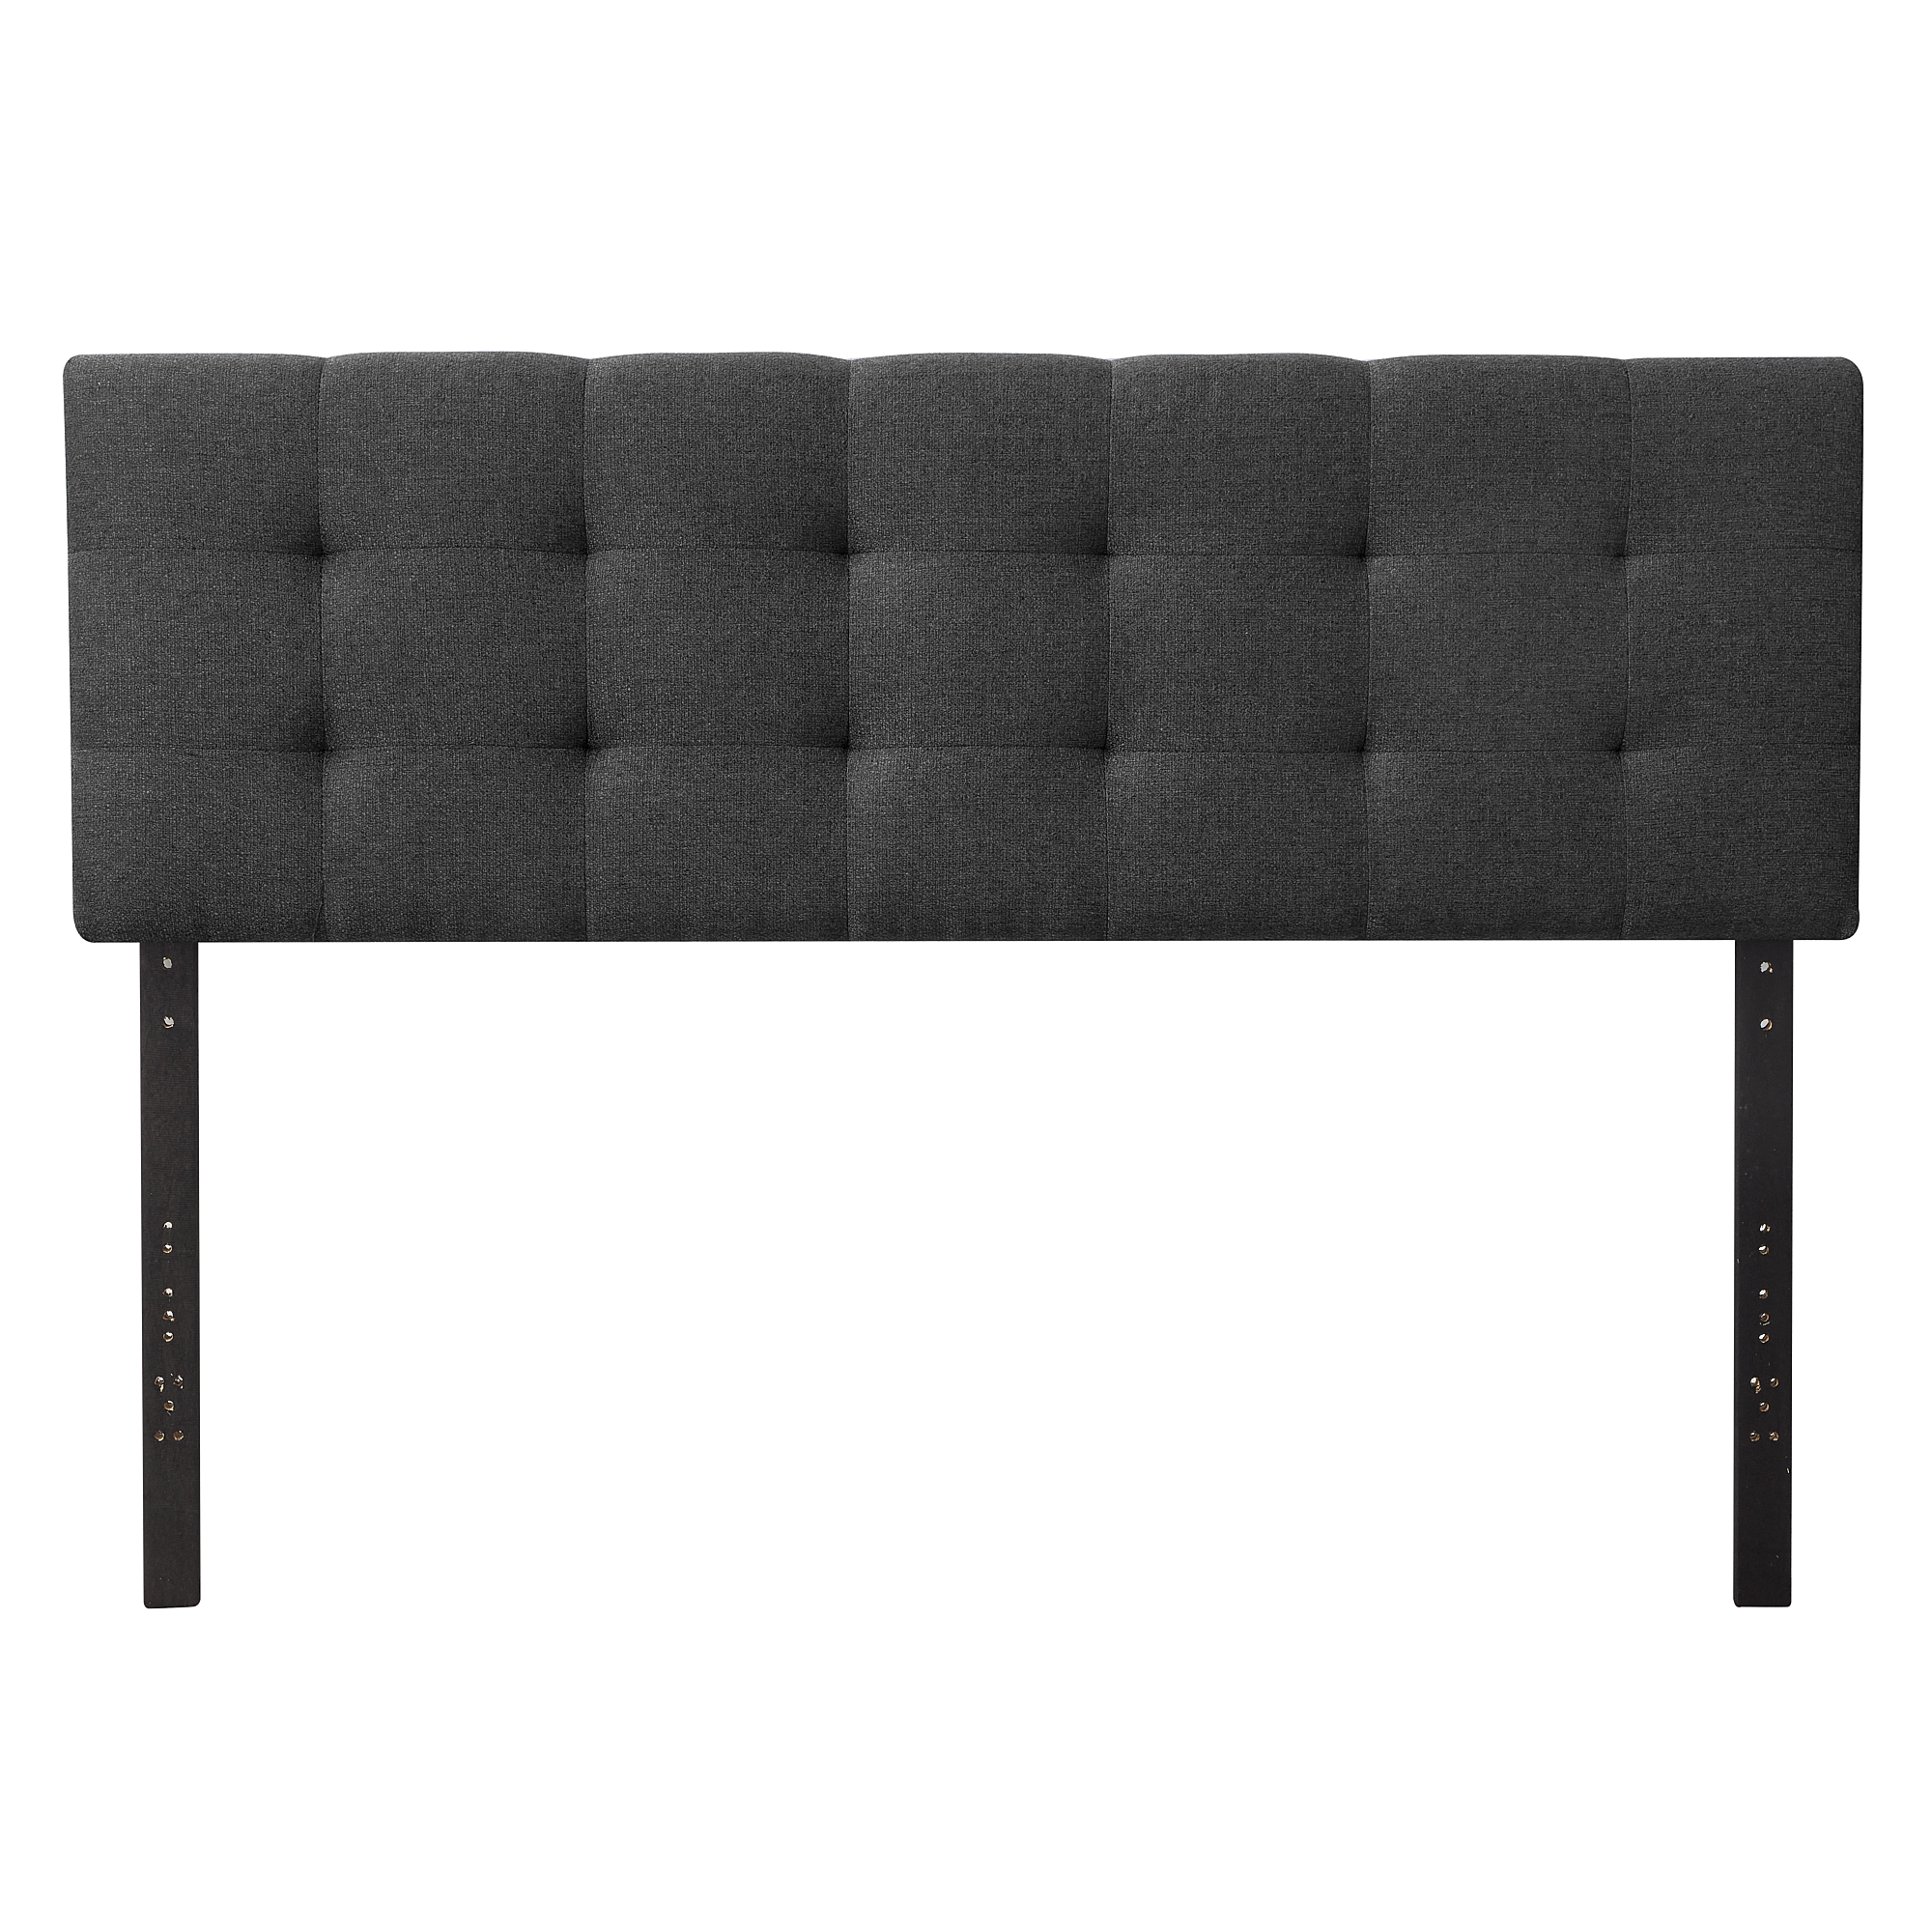 Rest Haven Eugene Square Tufted Upholstered Headboard, Twin/Twin XL, Charcoal - image 2 of 10